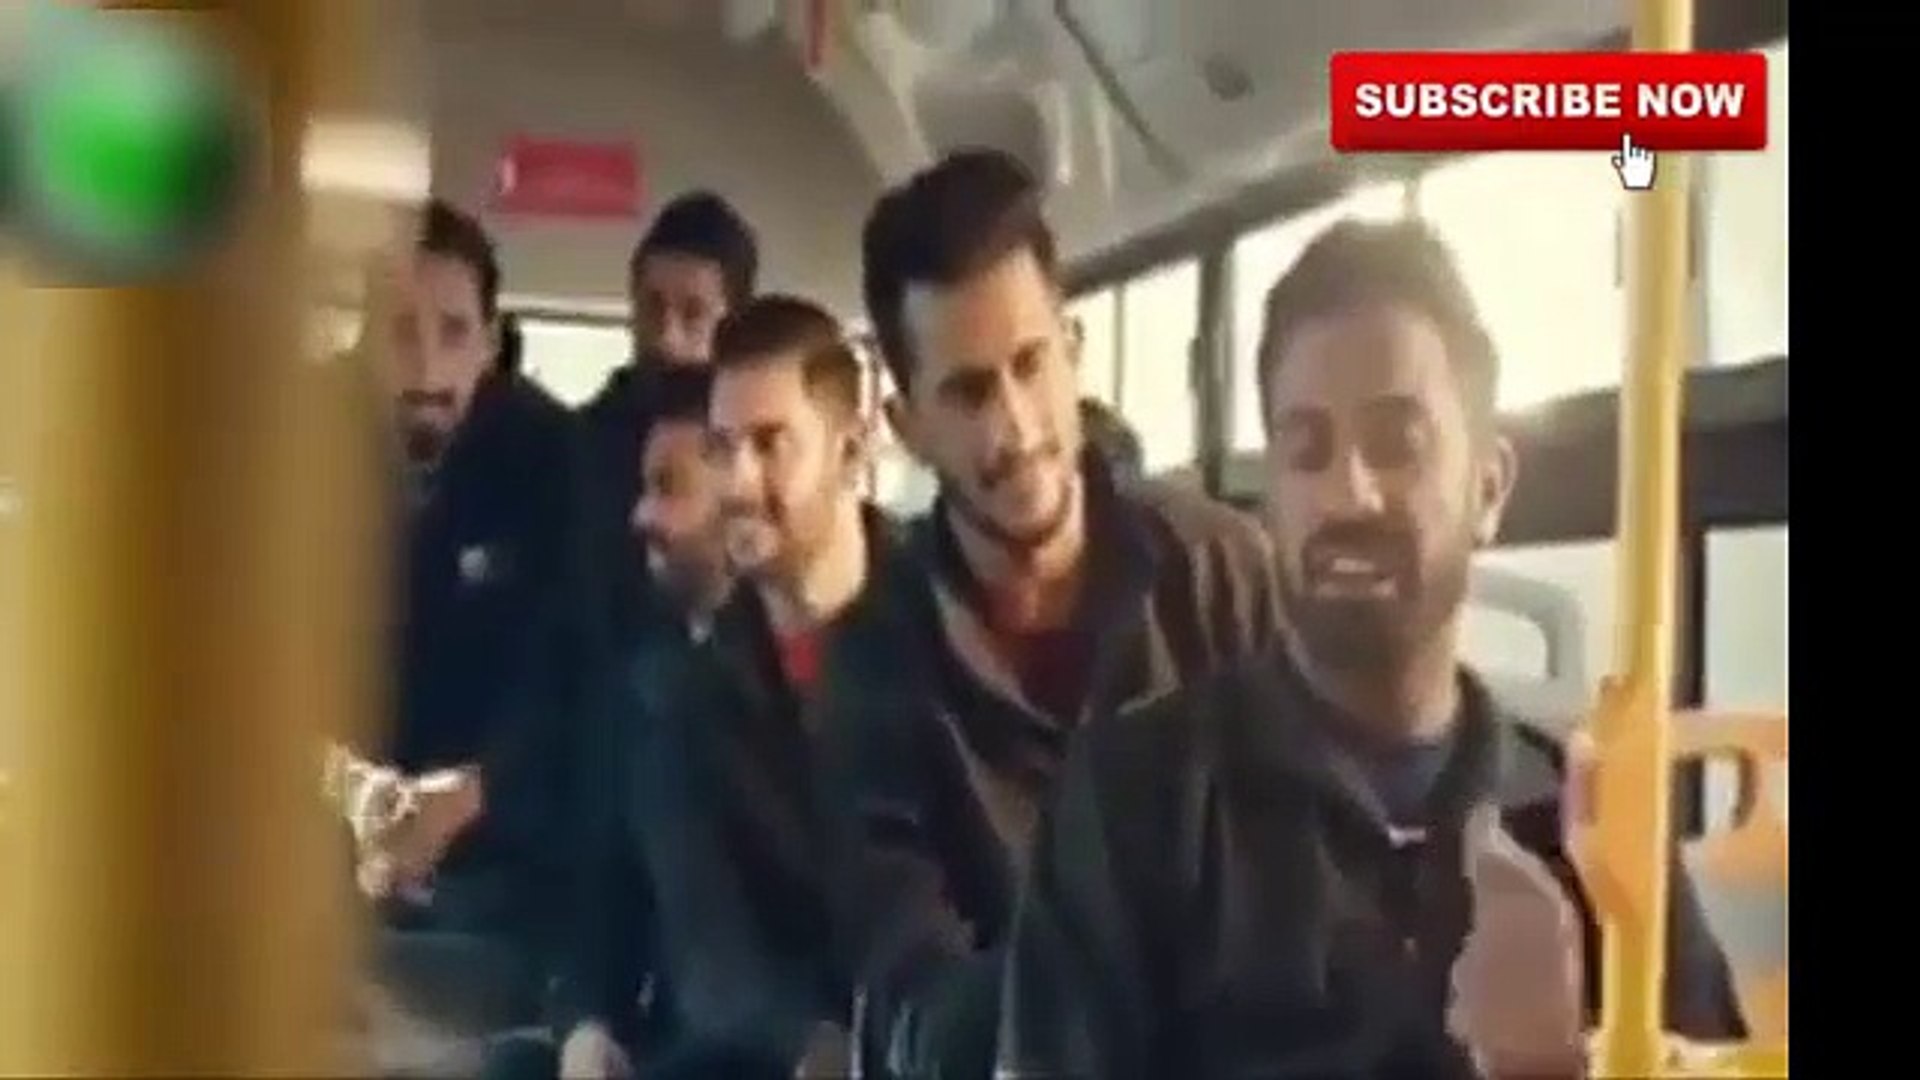 PSL 2018 Funny Add PSL 3 New Ads Funny Ads for Pakistan Super League 2018 